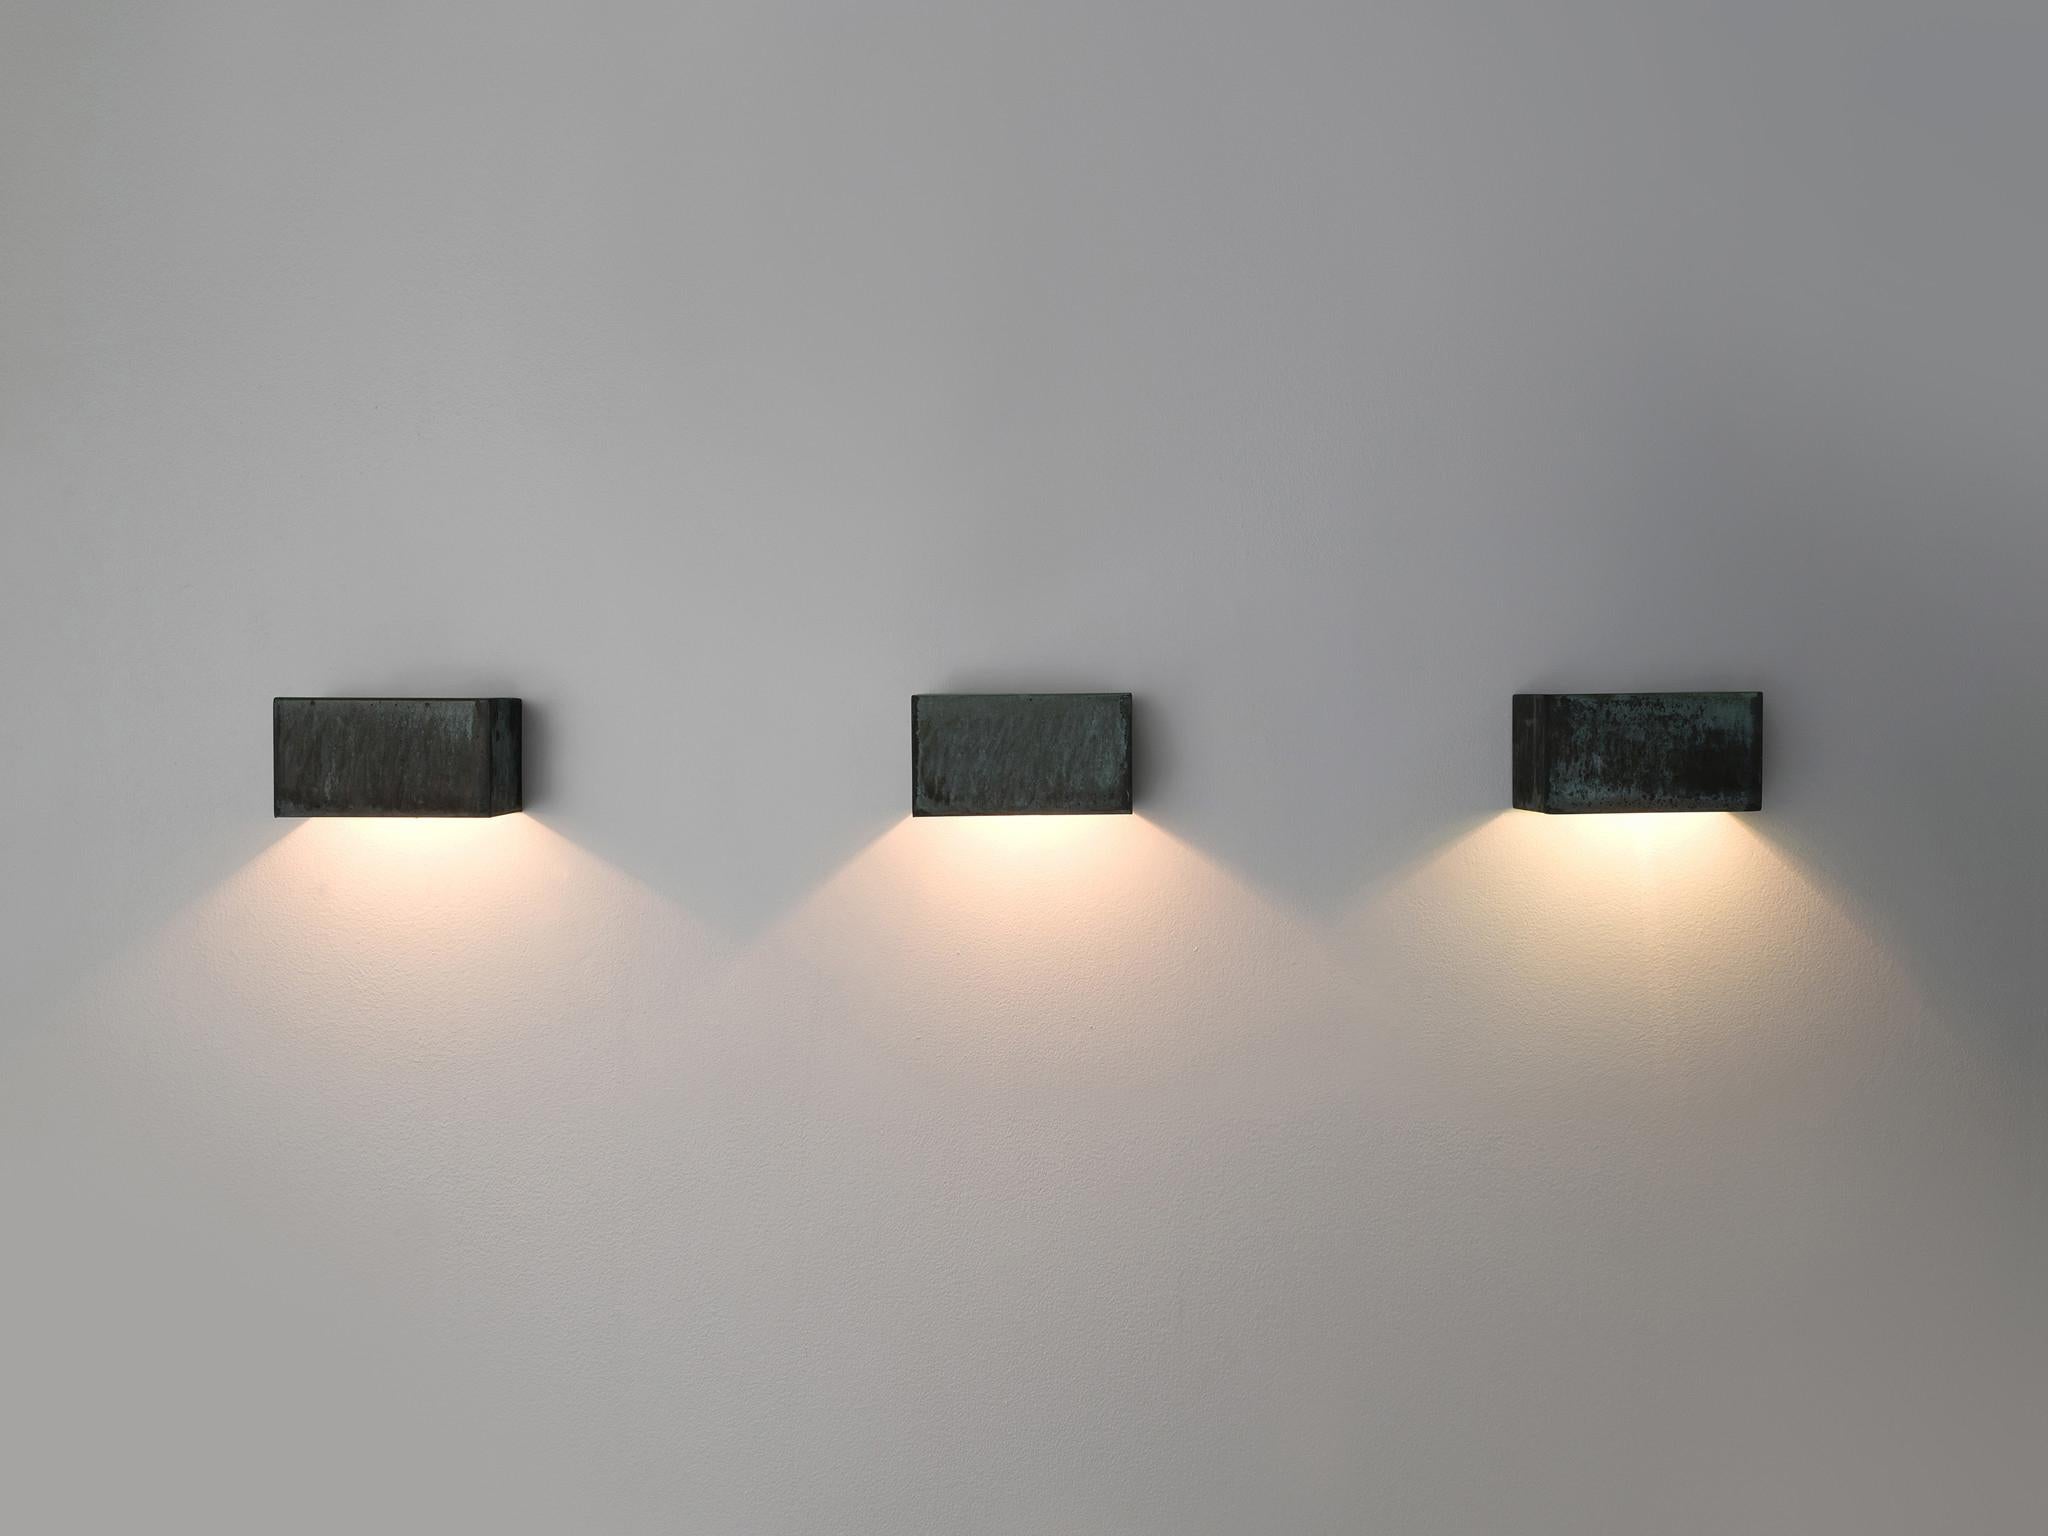 Set of wall lights, in patinated copper, for E. Hansson & Co., Sweden, 1960s.

Set of 13 wall lights in total, in patinated copper, for E. Hansson & Co., Sweden 1960s, in the style of Hans-Agne Jakobsen. Four items with a green patinated inside